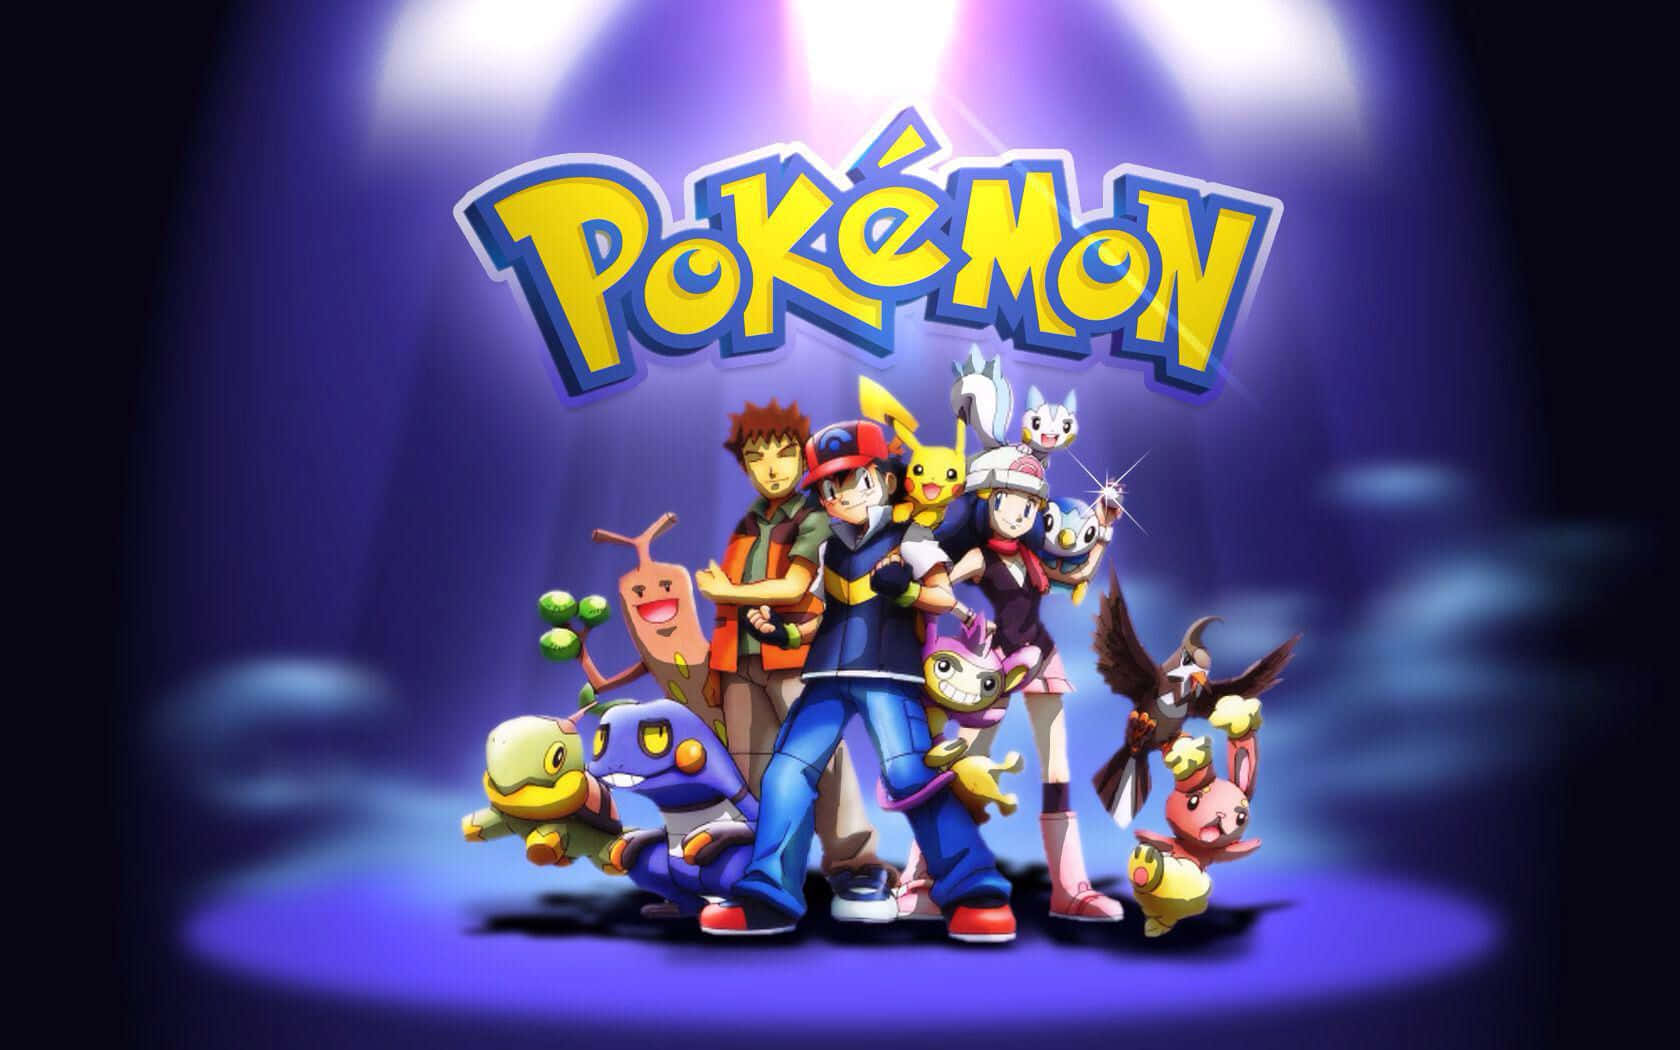 Pokémon Xy - Psp Psp Psp (note: This Sentence Is Already Written In English And Does Not Require Translation.) Wallpaper